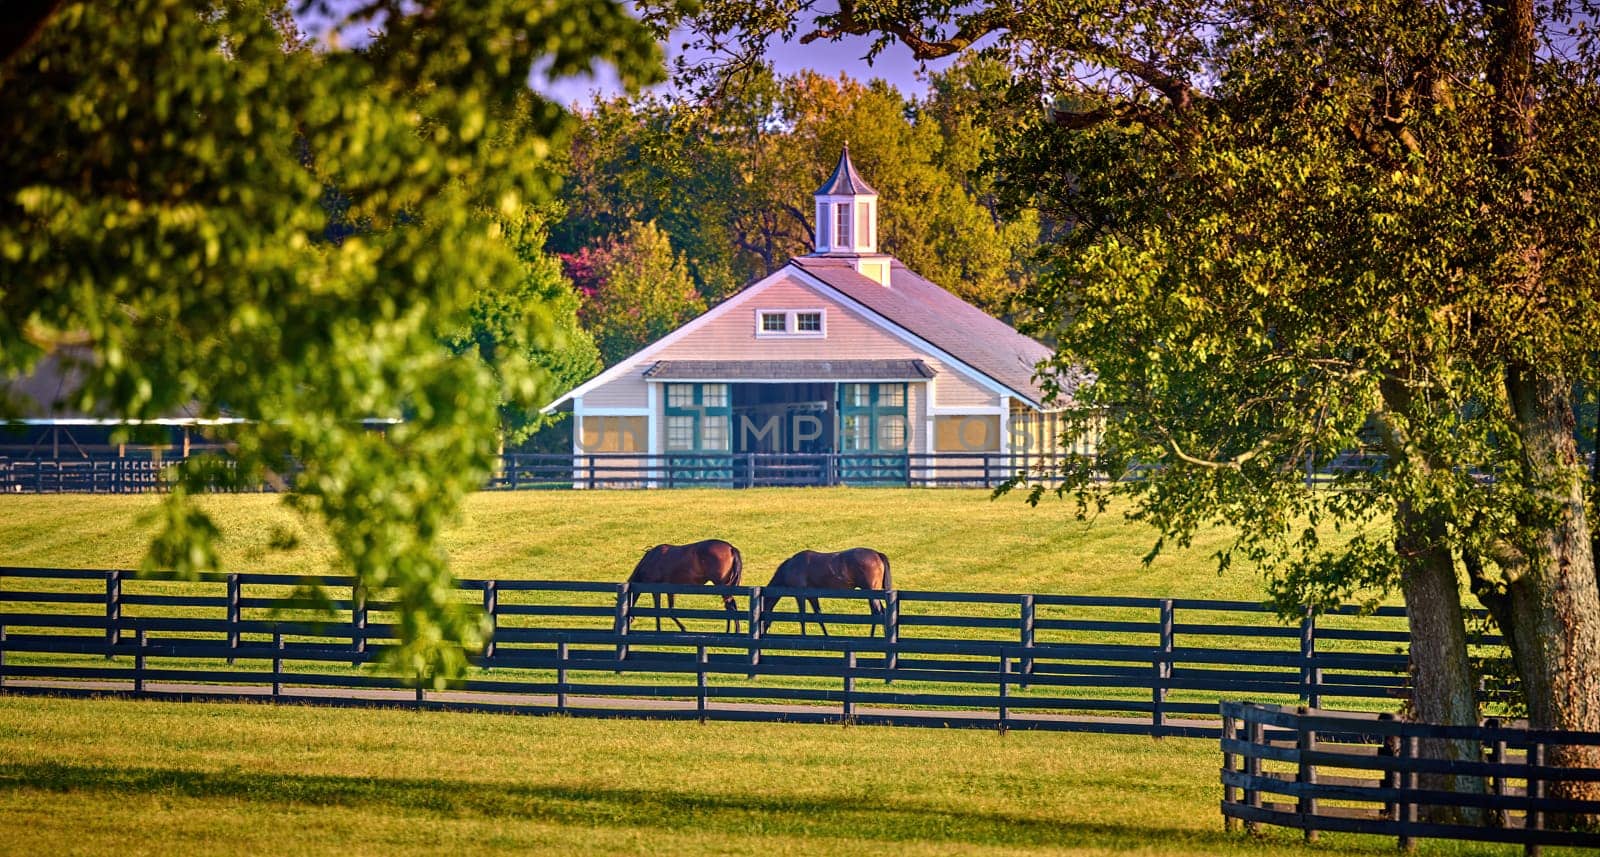 Two horses grazing with a horse barn in the background. by patrickstock